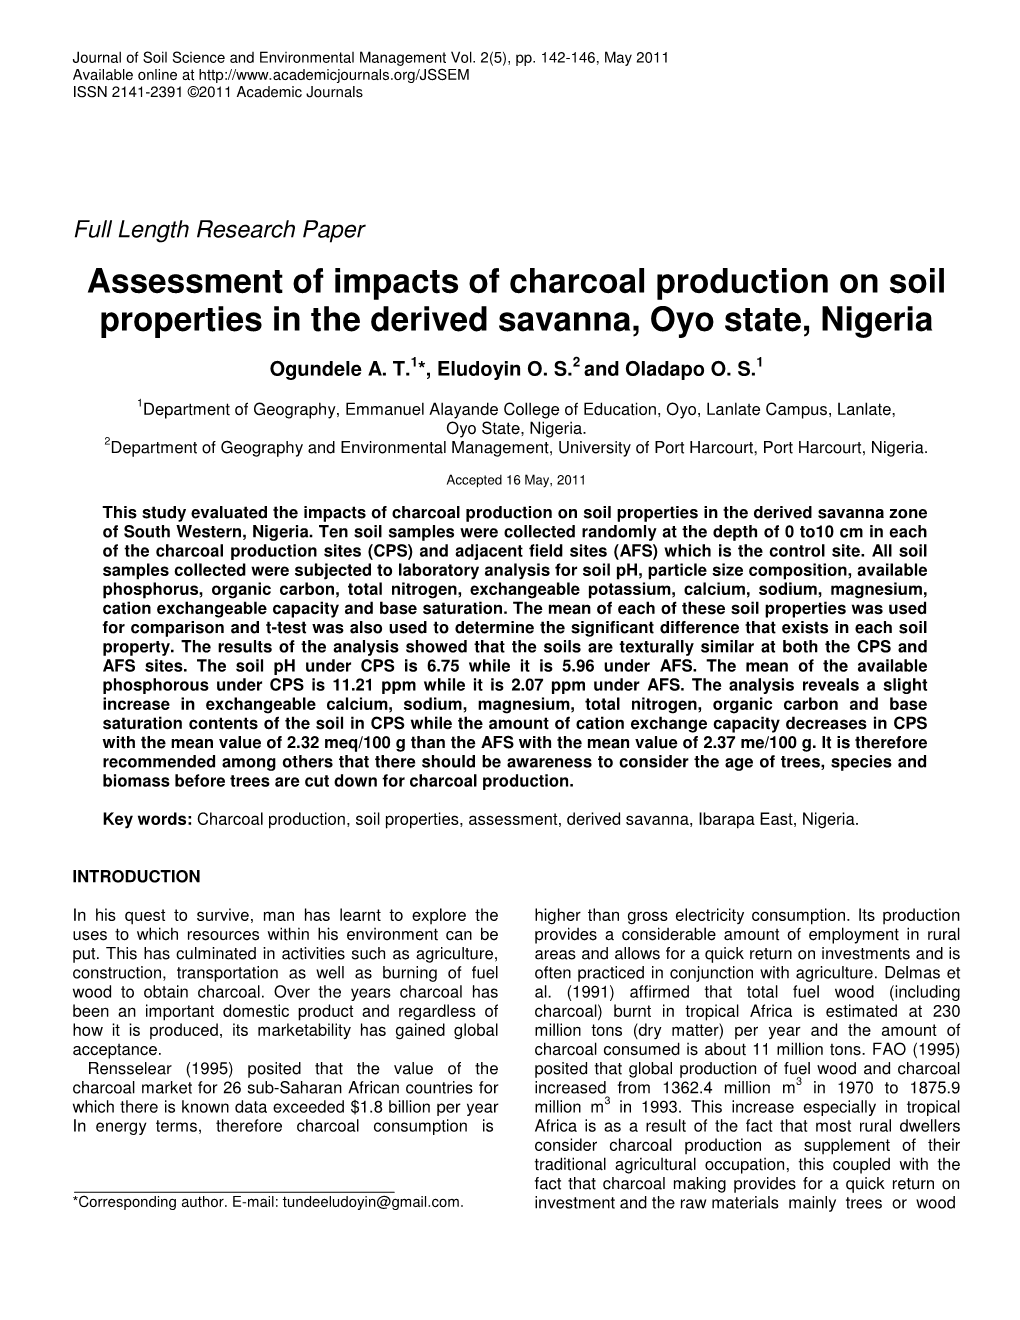 Assessment of Impacts of Charcoal Production on Soil Properties in the Derived Savanna, Oyo State, Nigeria